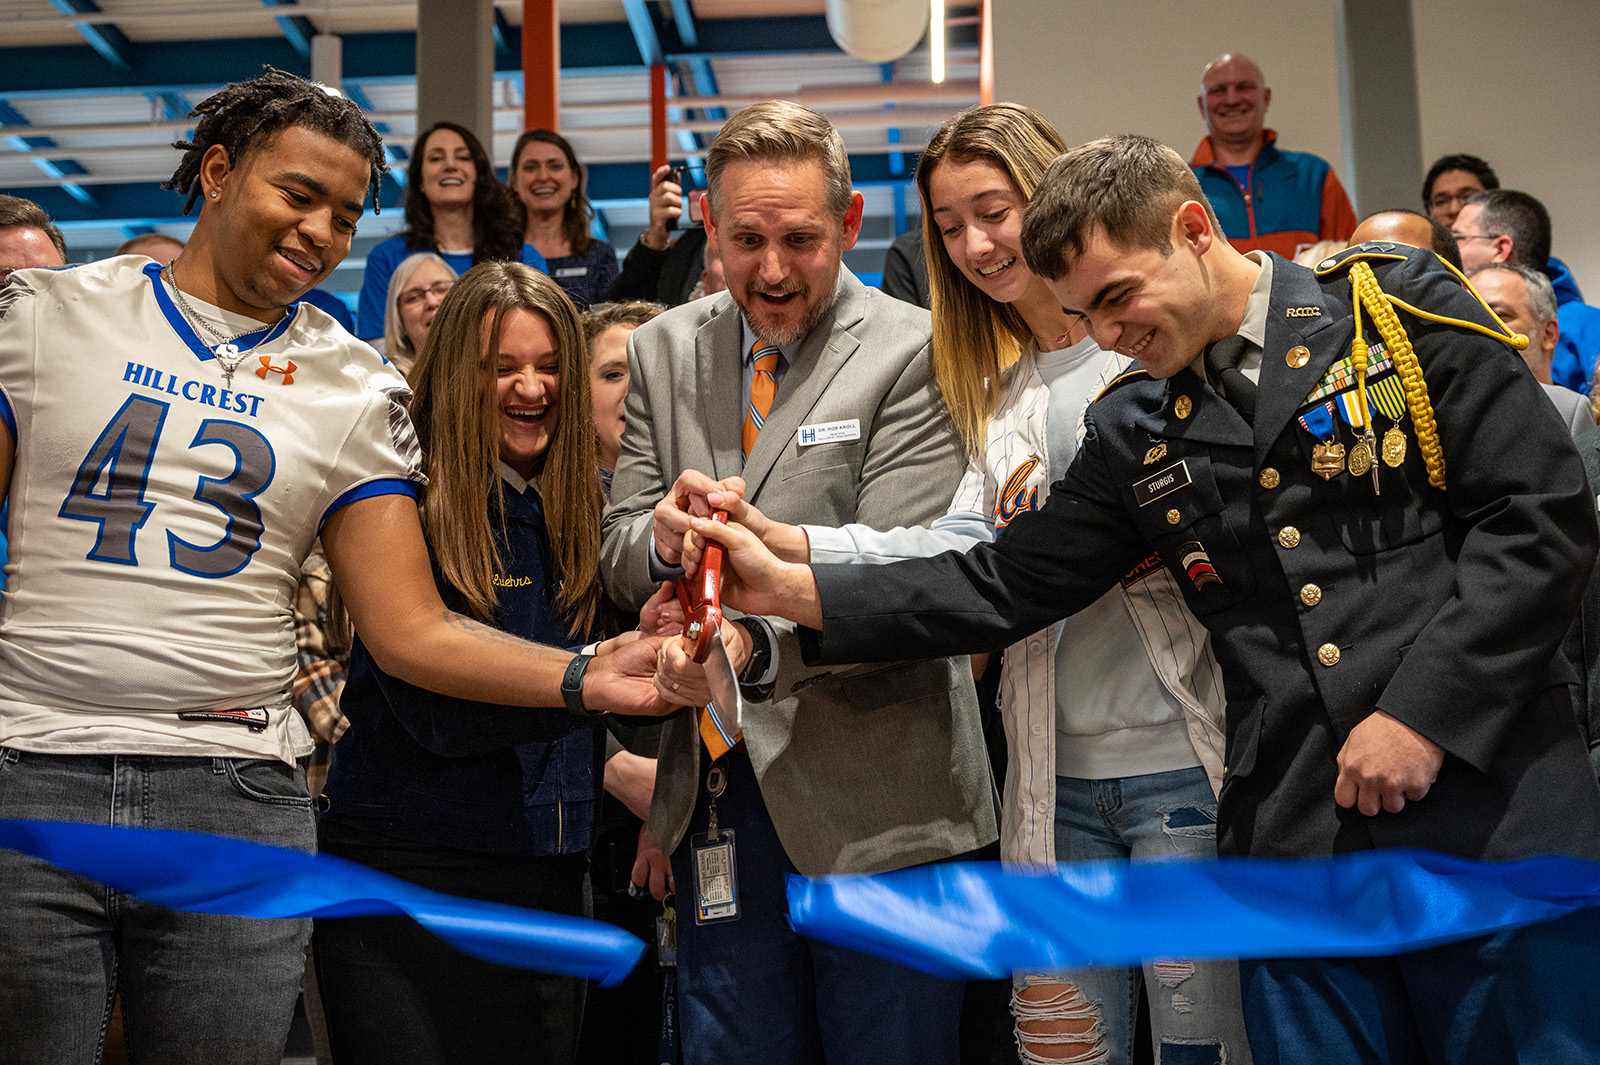 ‘You’ve got the boujee high school’: Springfield’s northside celebrates renovated Hillcrest High School